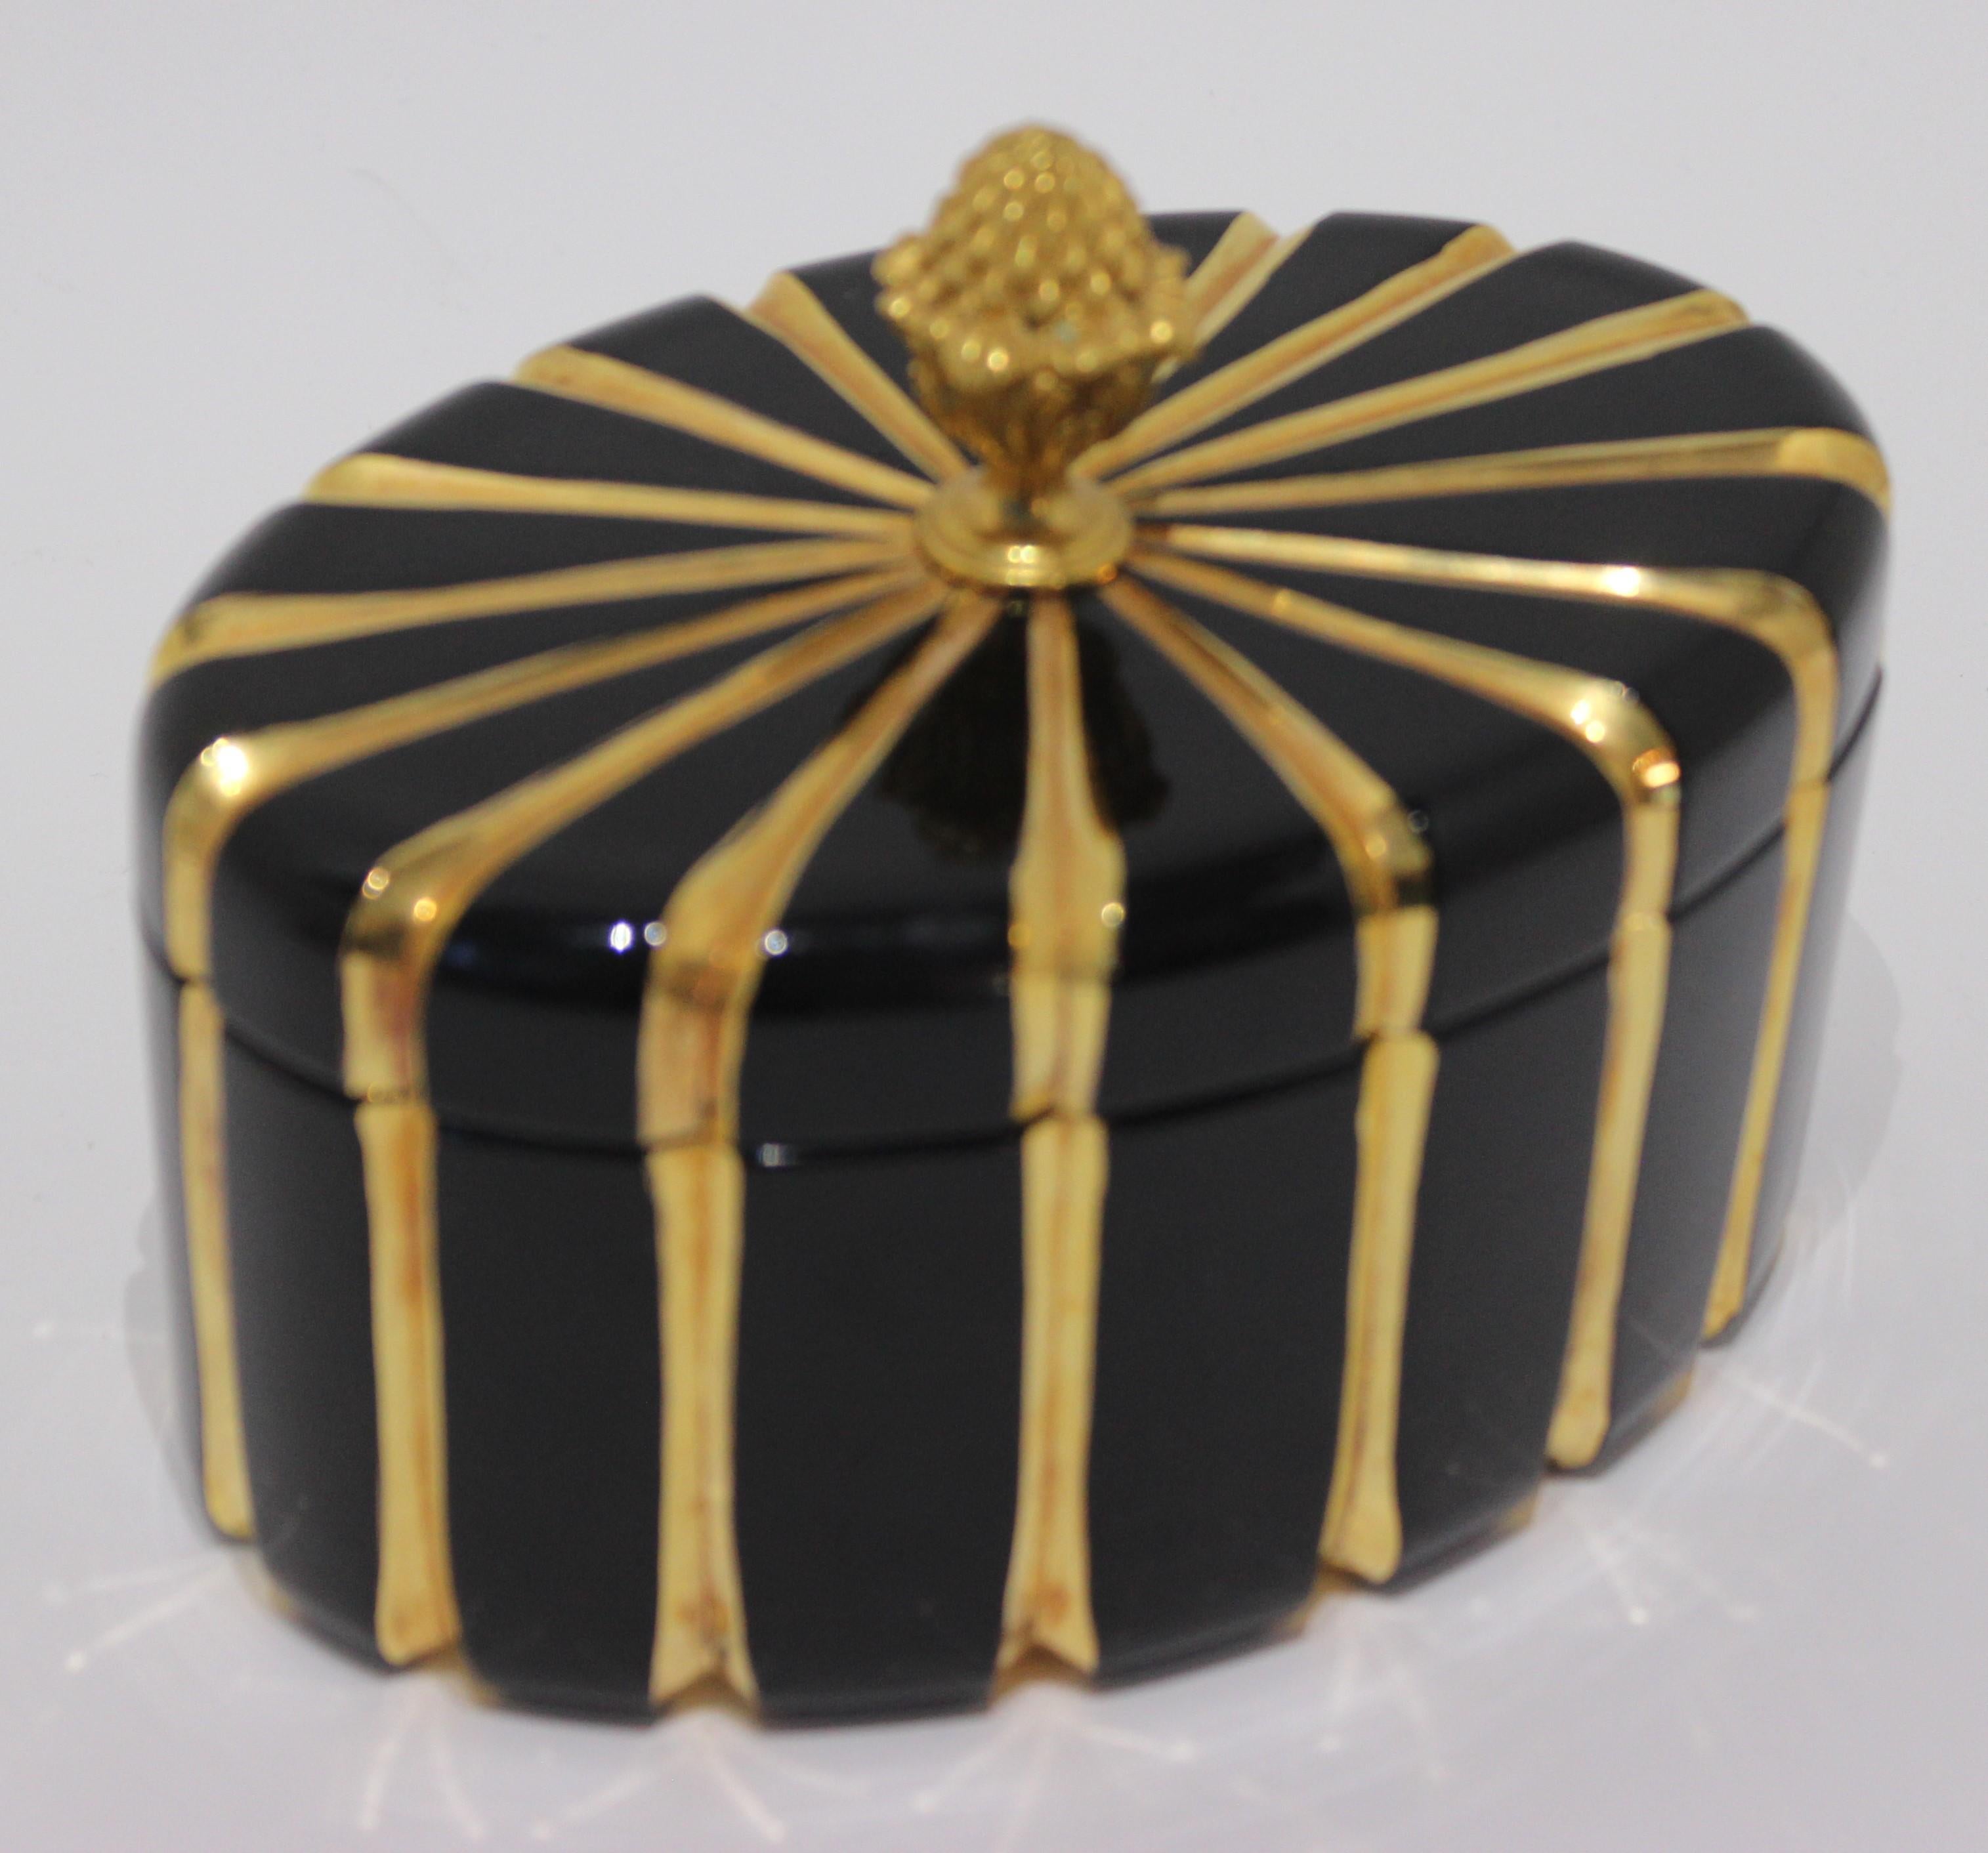 Vintage 1970s oval jet black glass box with 24-karat gold and bronze doré lid handle by Baldi Firenze, Italy.
This is a rare example of Baldi Firenze's exclusive workshop before their current House Jewels line was marketed.